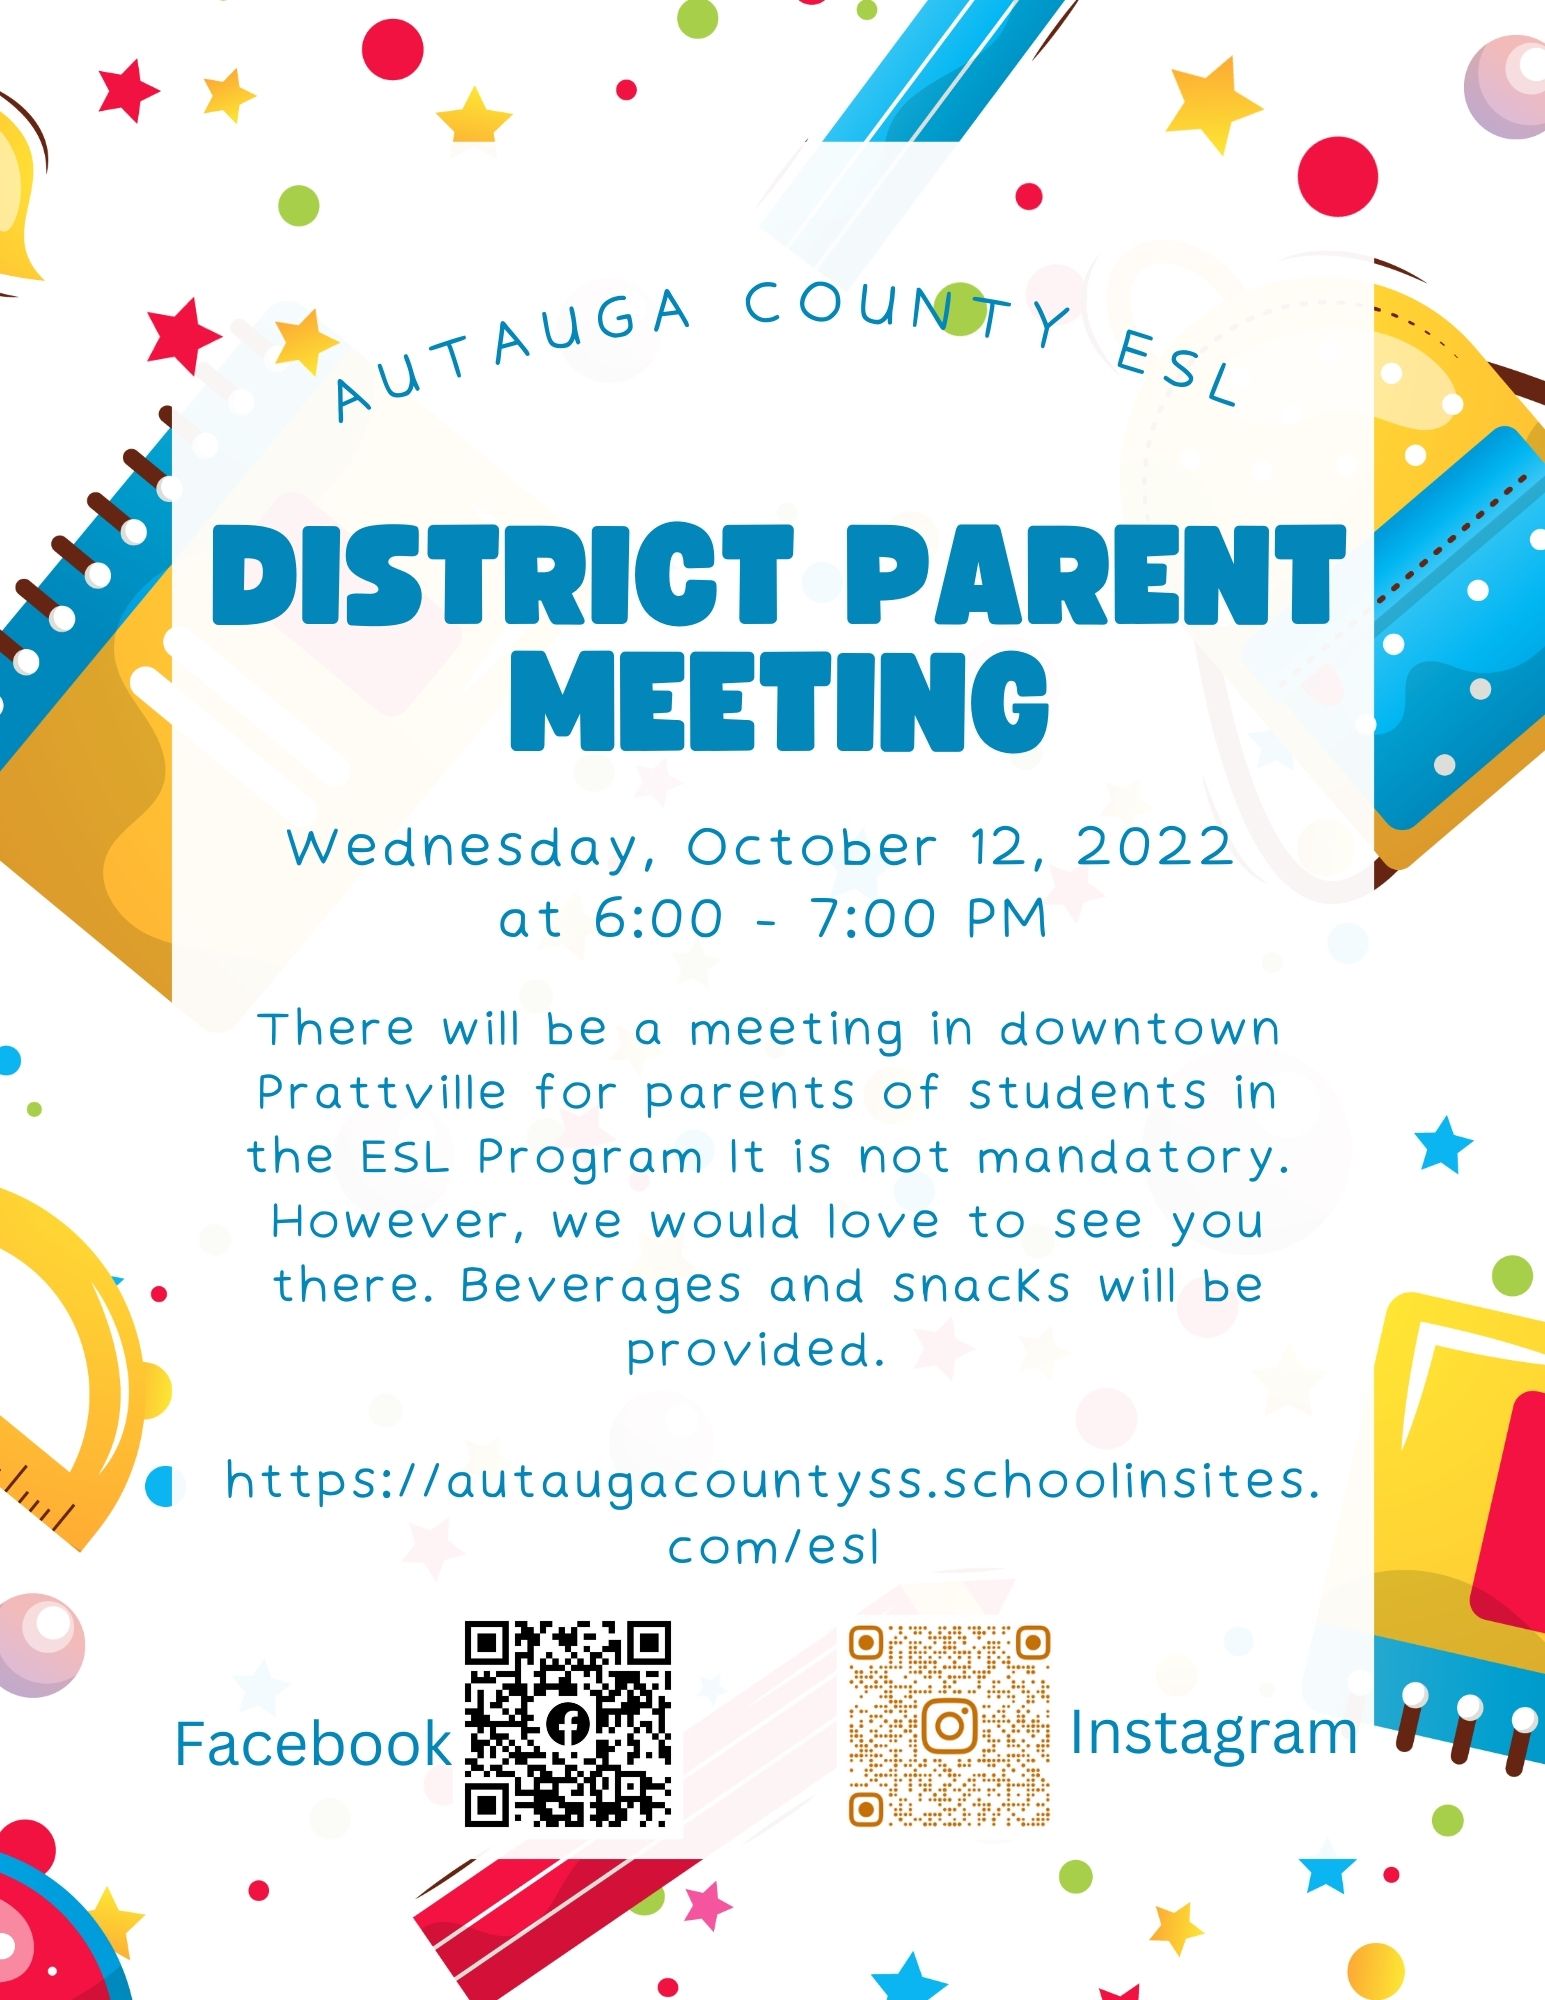 District Parent Meeting, October 12, 6:00 pm, in downtown Prattville, for parents of students in the ESL program, meeting is not mandatory